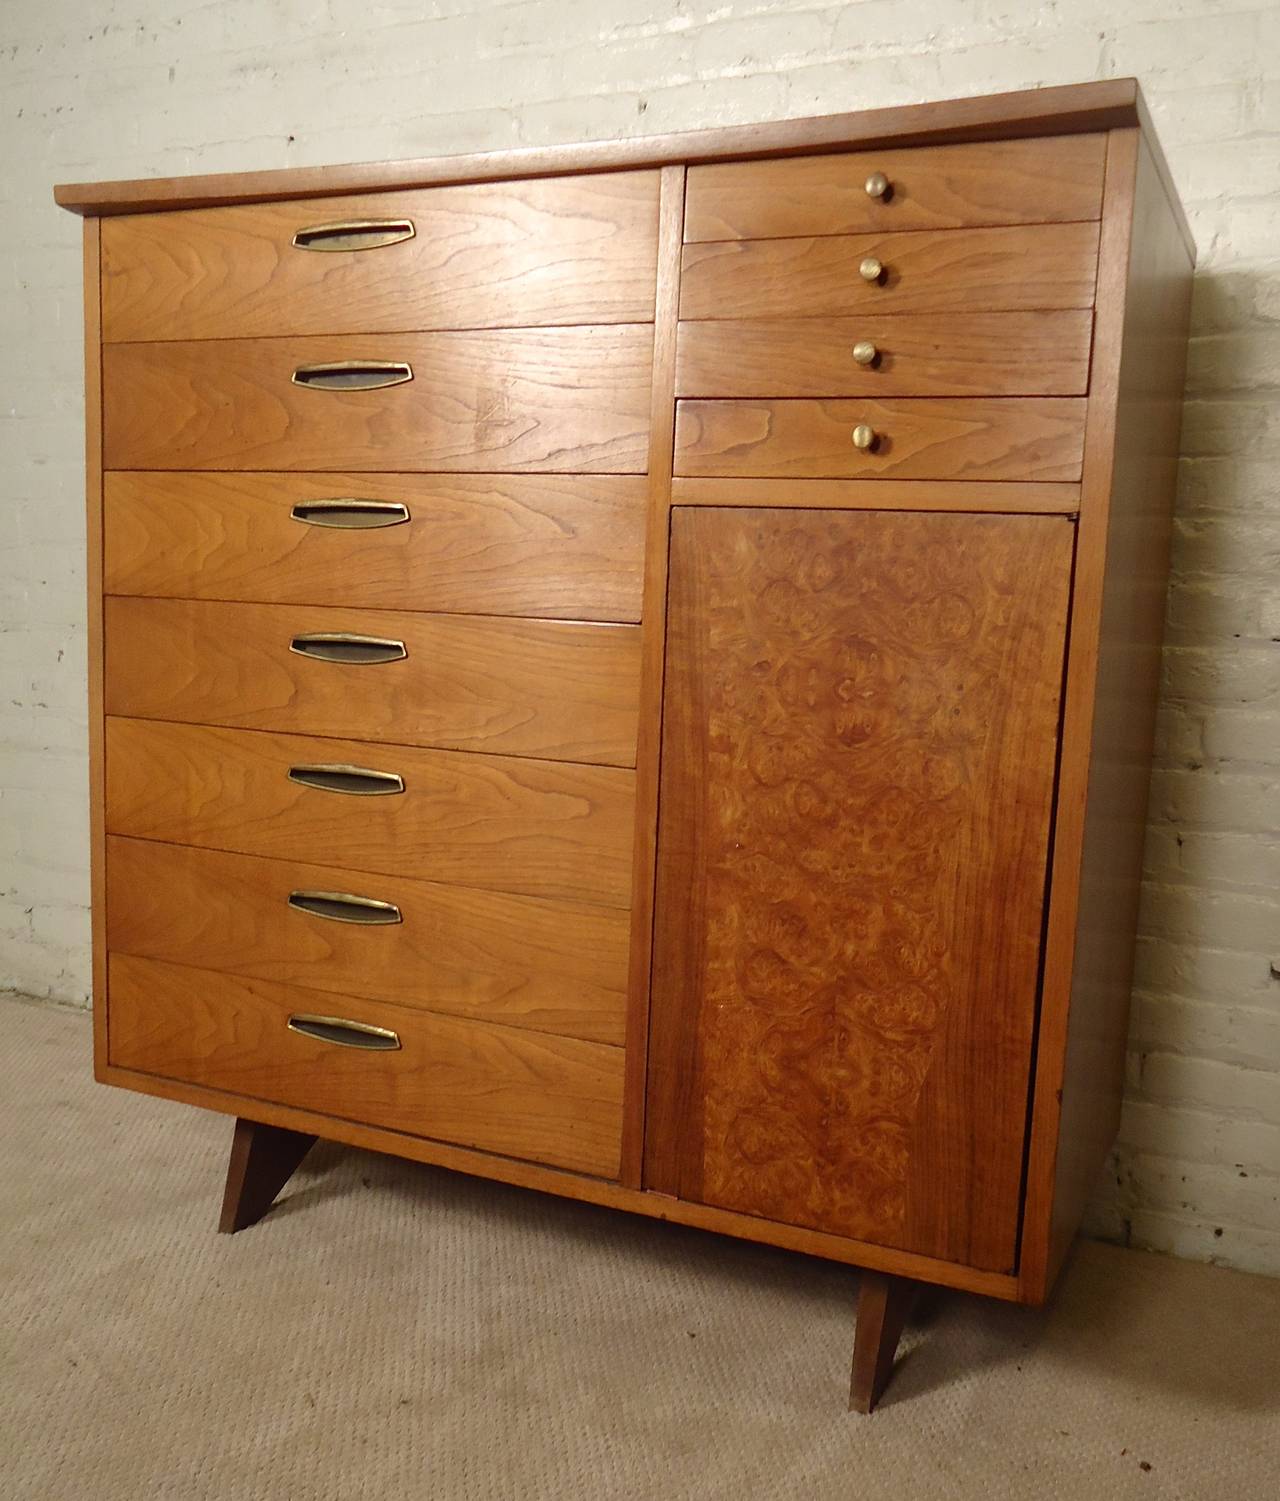 Beautiful Mid-Century Modern chest of drawers designed by George Nakashima for Widdicomb. Great design from the premier Mid-Century Furniture maker. Features include curved top, walnut grain, accenting brass hardware and gorgeous burlwood front